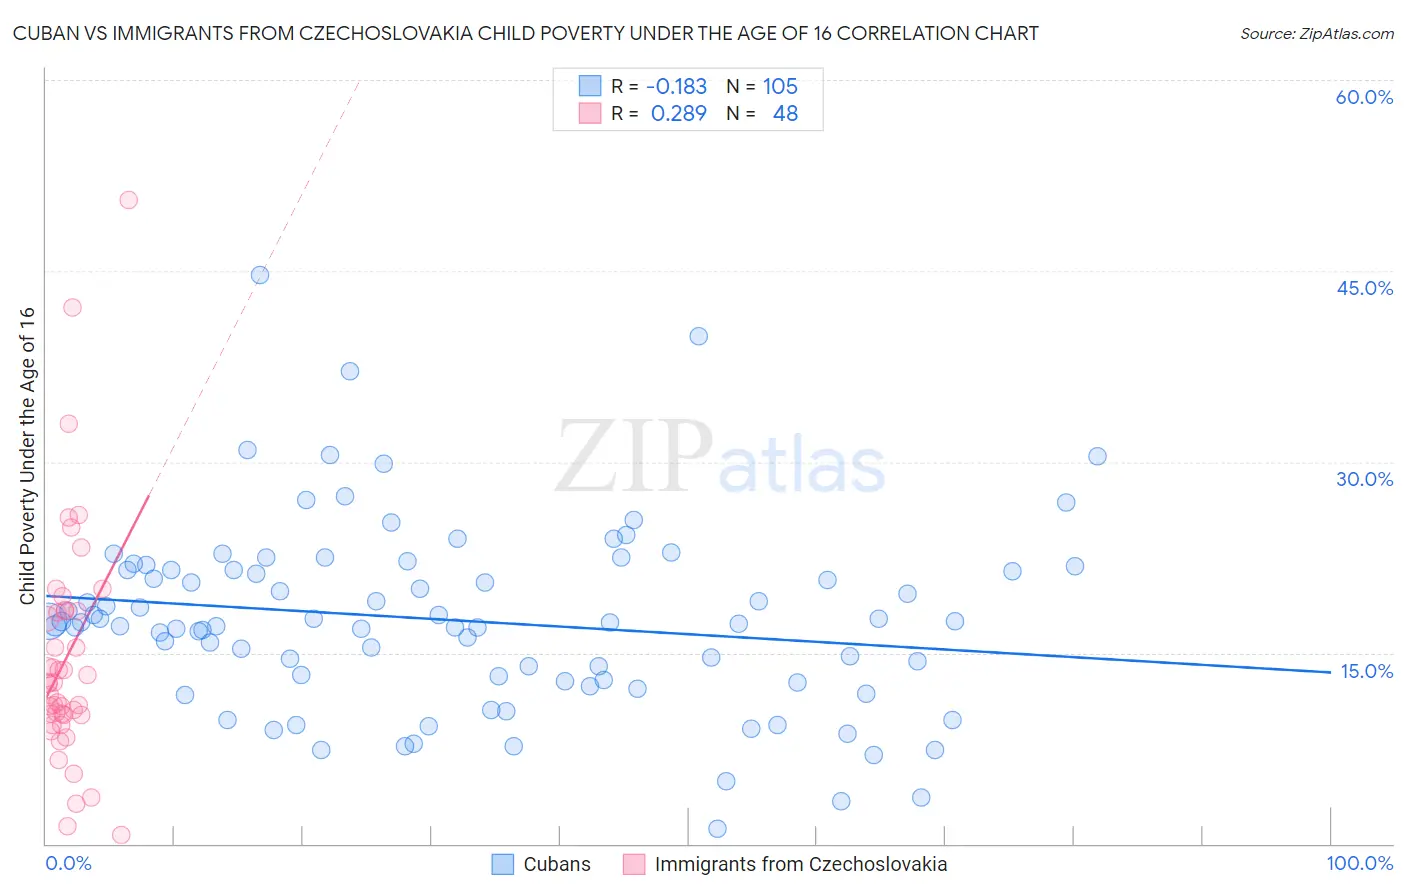 Cuban vs Immigrants from Czechoslovakia Child Poverty Under the Age of 16